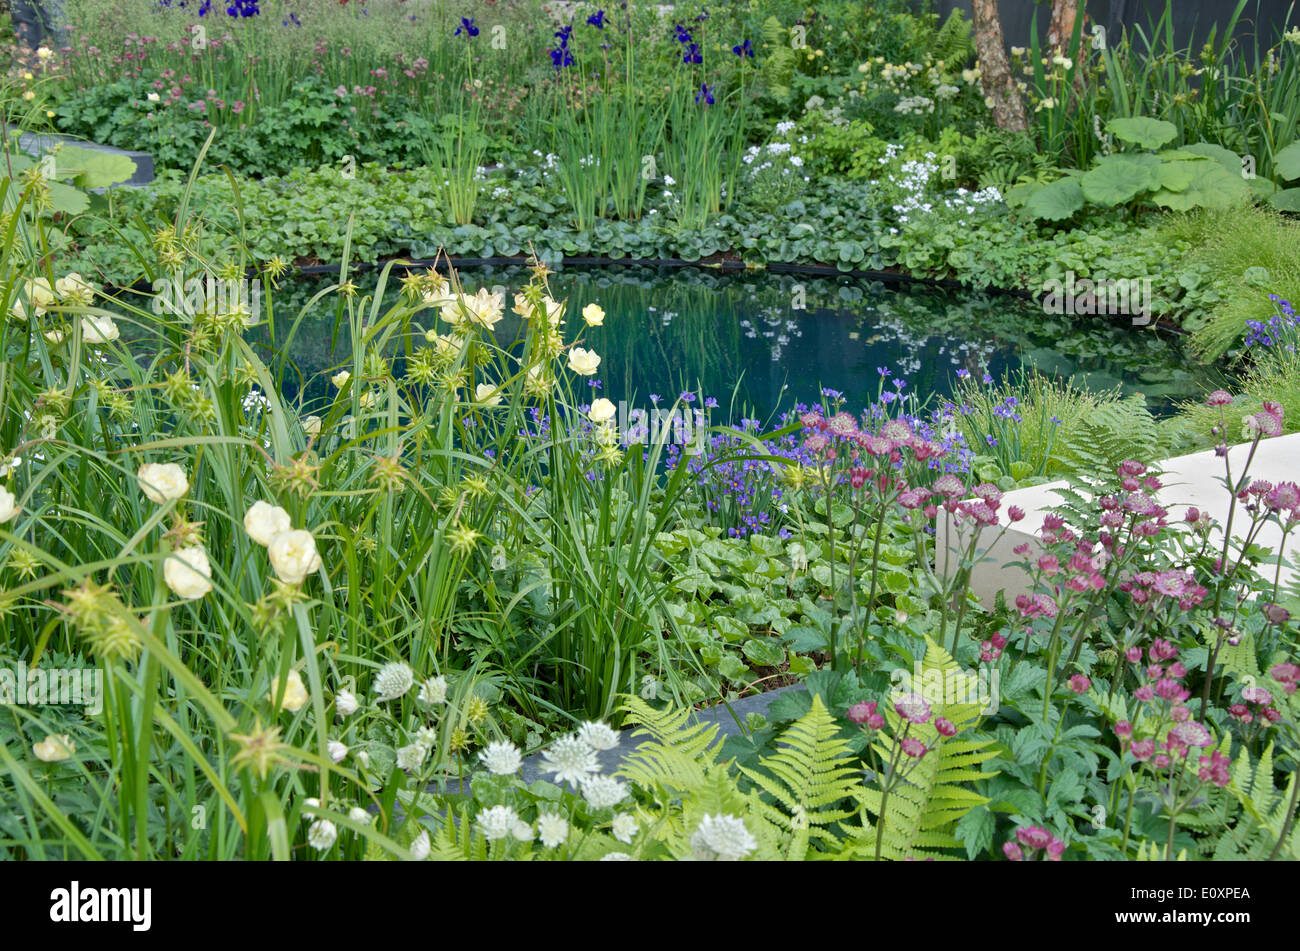 The mine crater pond and planting in the Gold Medal Winning garden 'No Man's Land: ABF The Soldiers' Charity Garden to mark the centenary of World War One', at RHS Chelsea Flower Show 2014, designed by Charlotte Rowe. Stock Photo